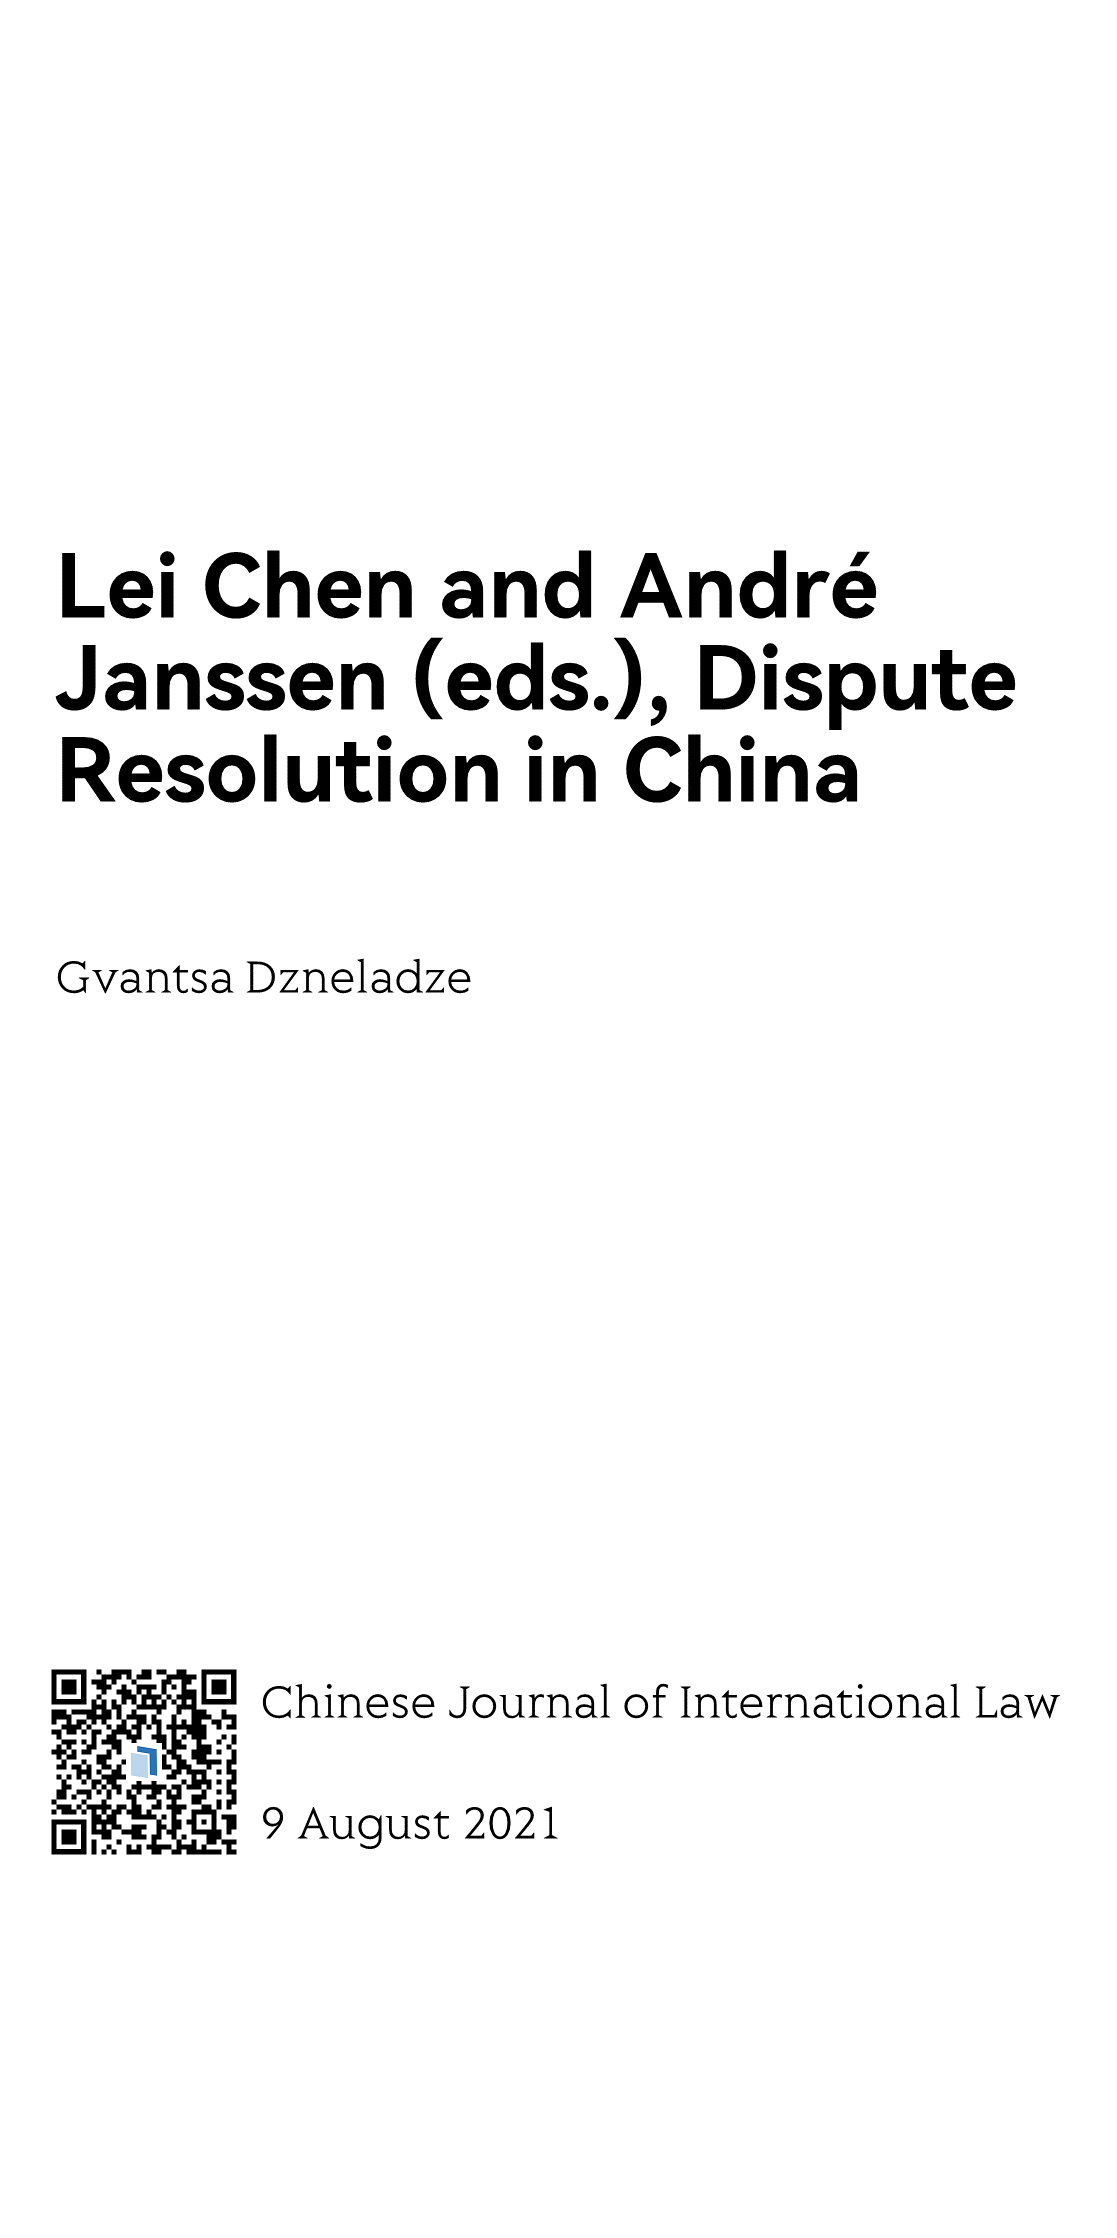 Chinese Journal of International Law_1